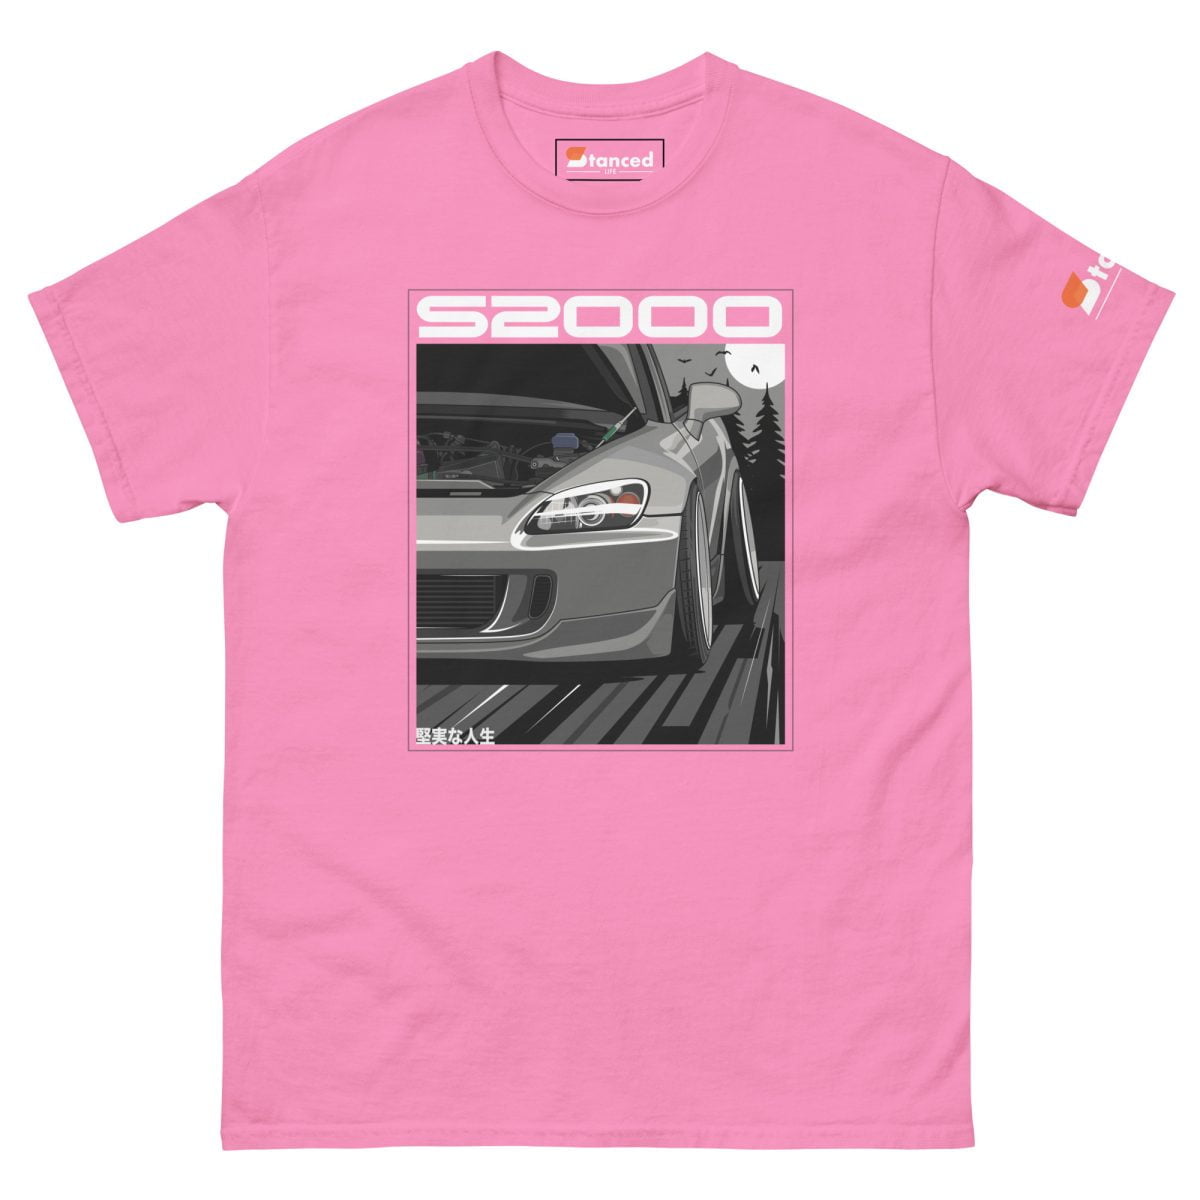 A Honda S2000 Mens Graphic T shirt featuring the iconic Honda S2000 on a pink backdrop | StancedLife